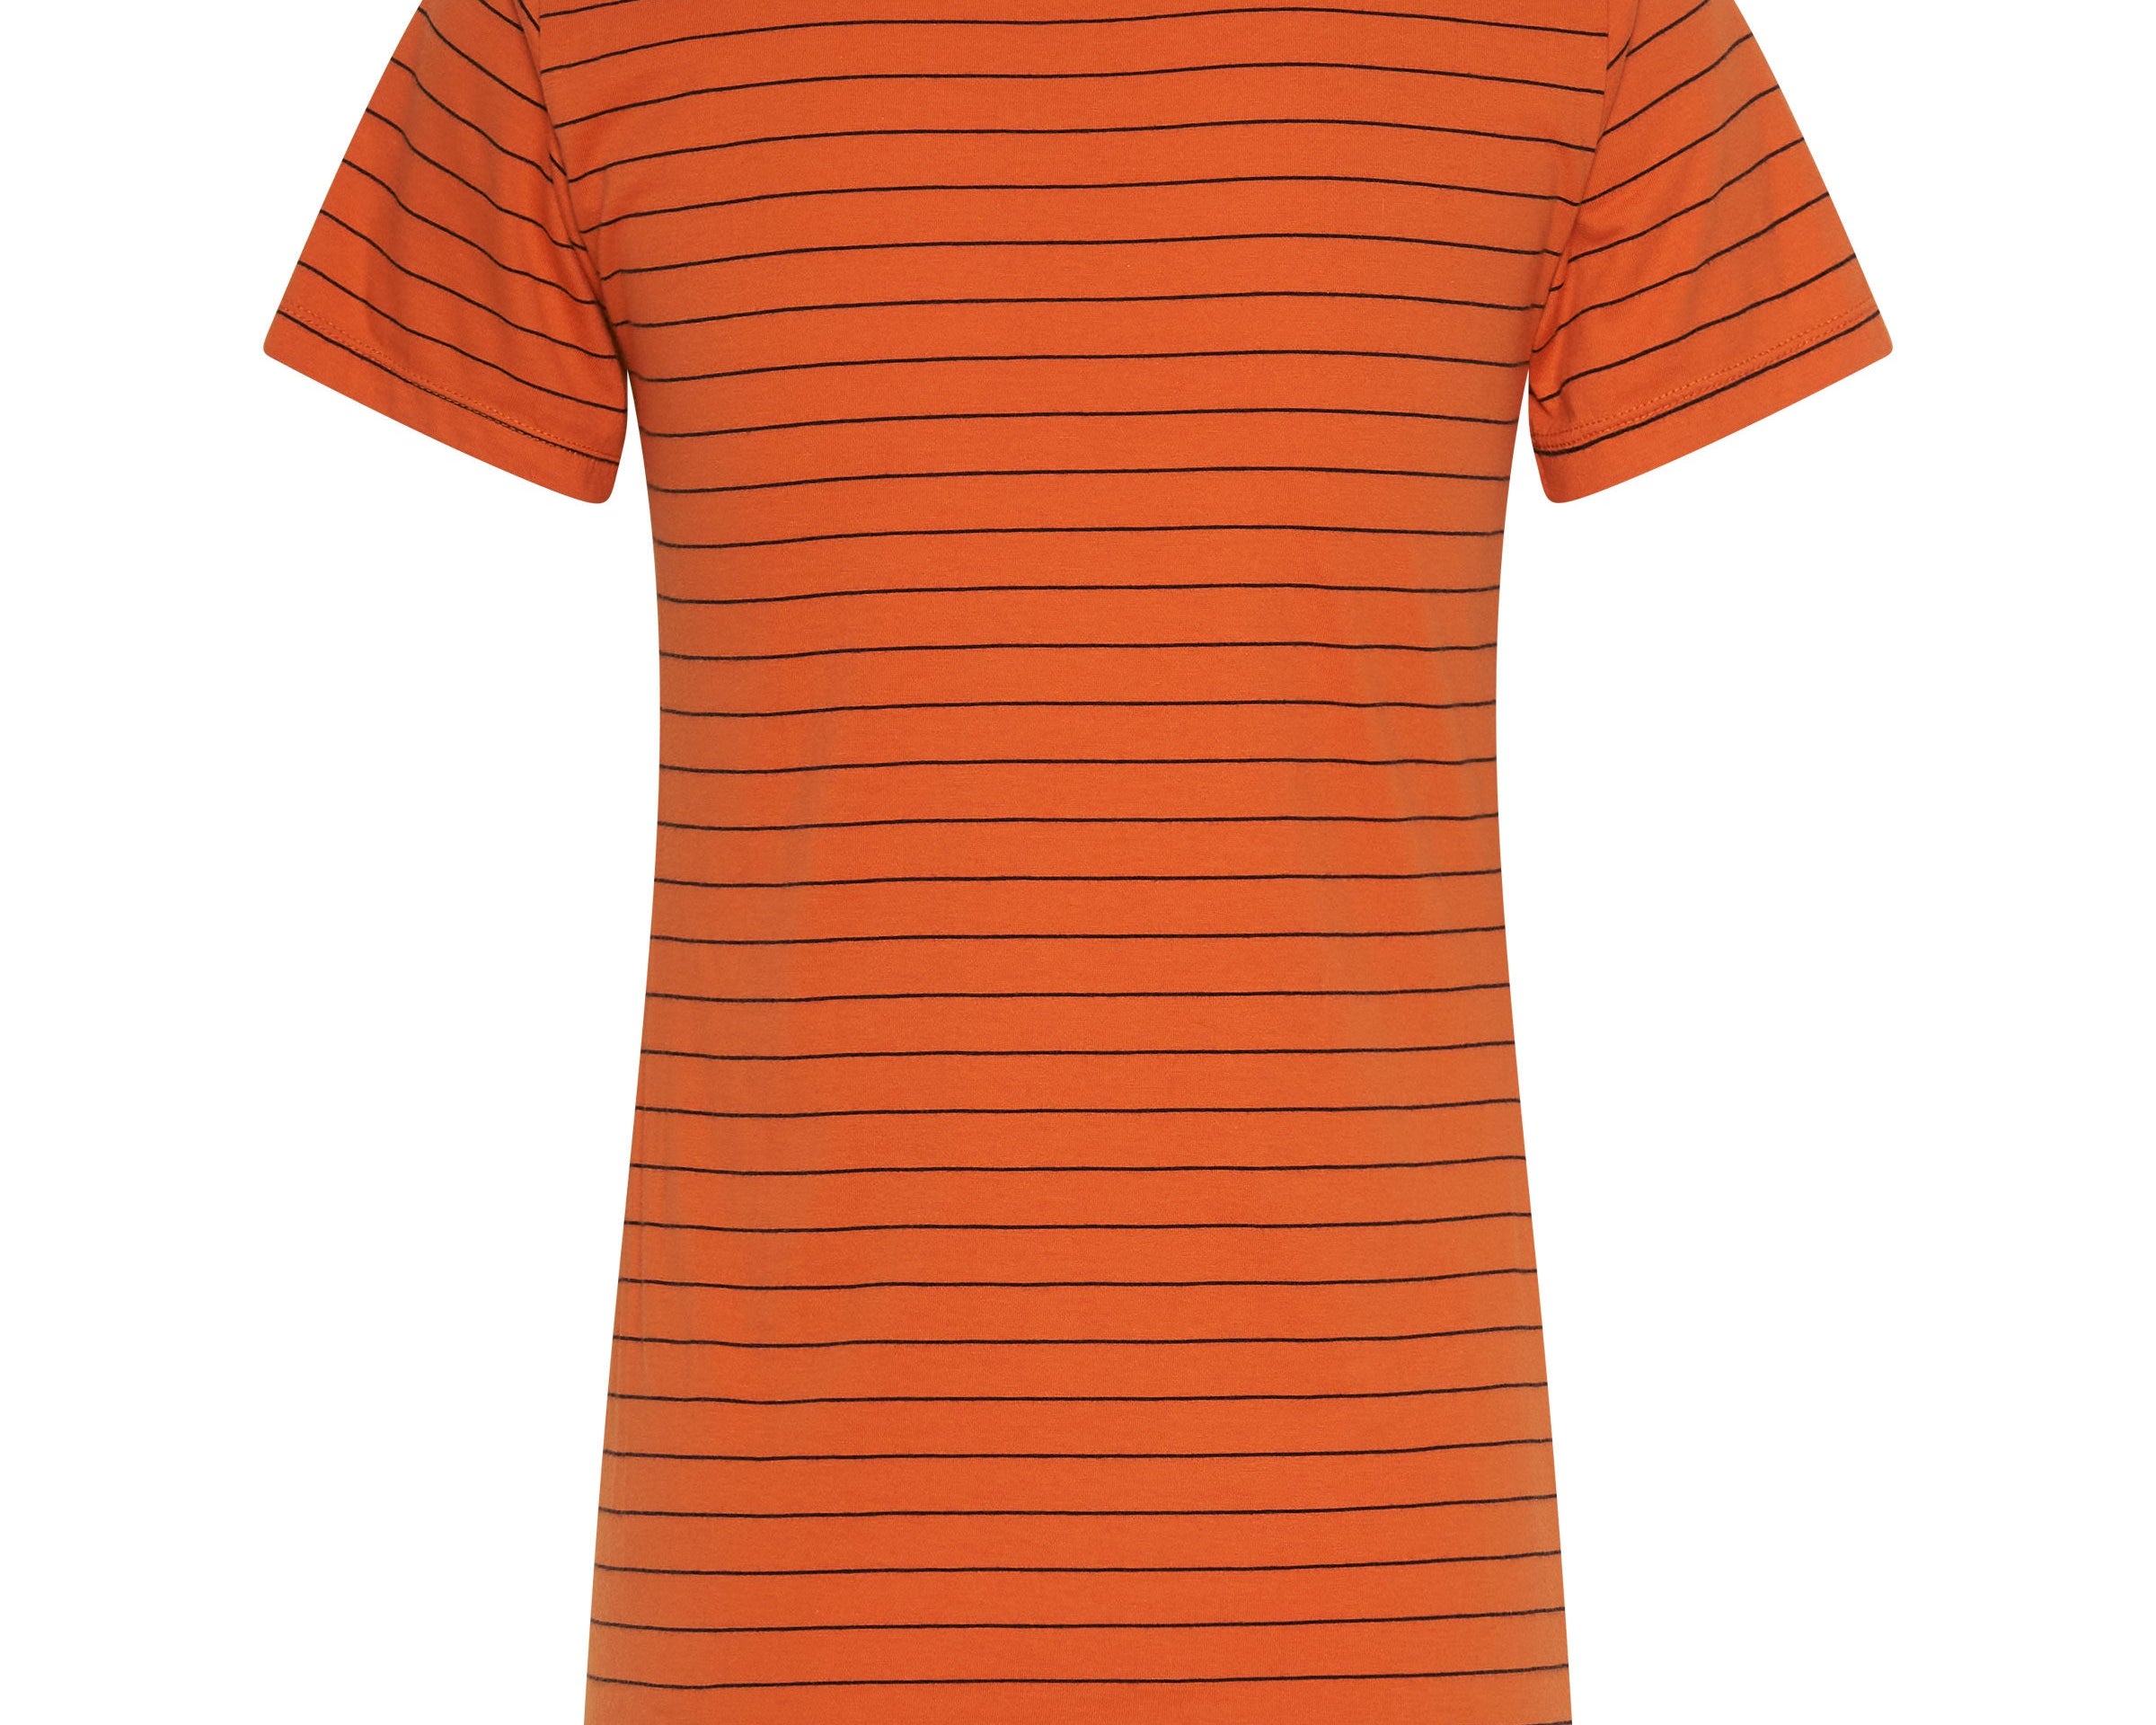 BOWER BIRD EMBROIDERED LOGO FITTED TEE ORANGE